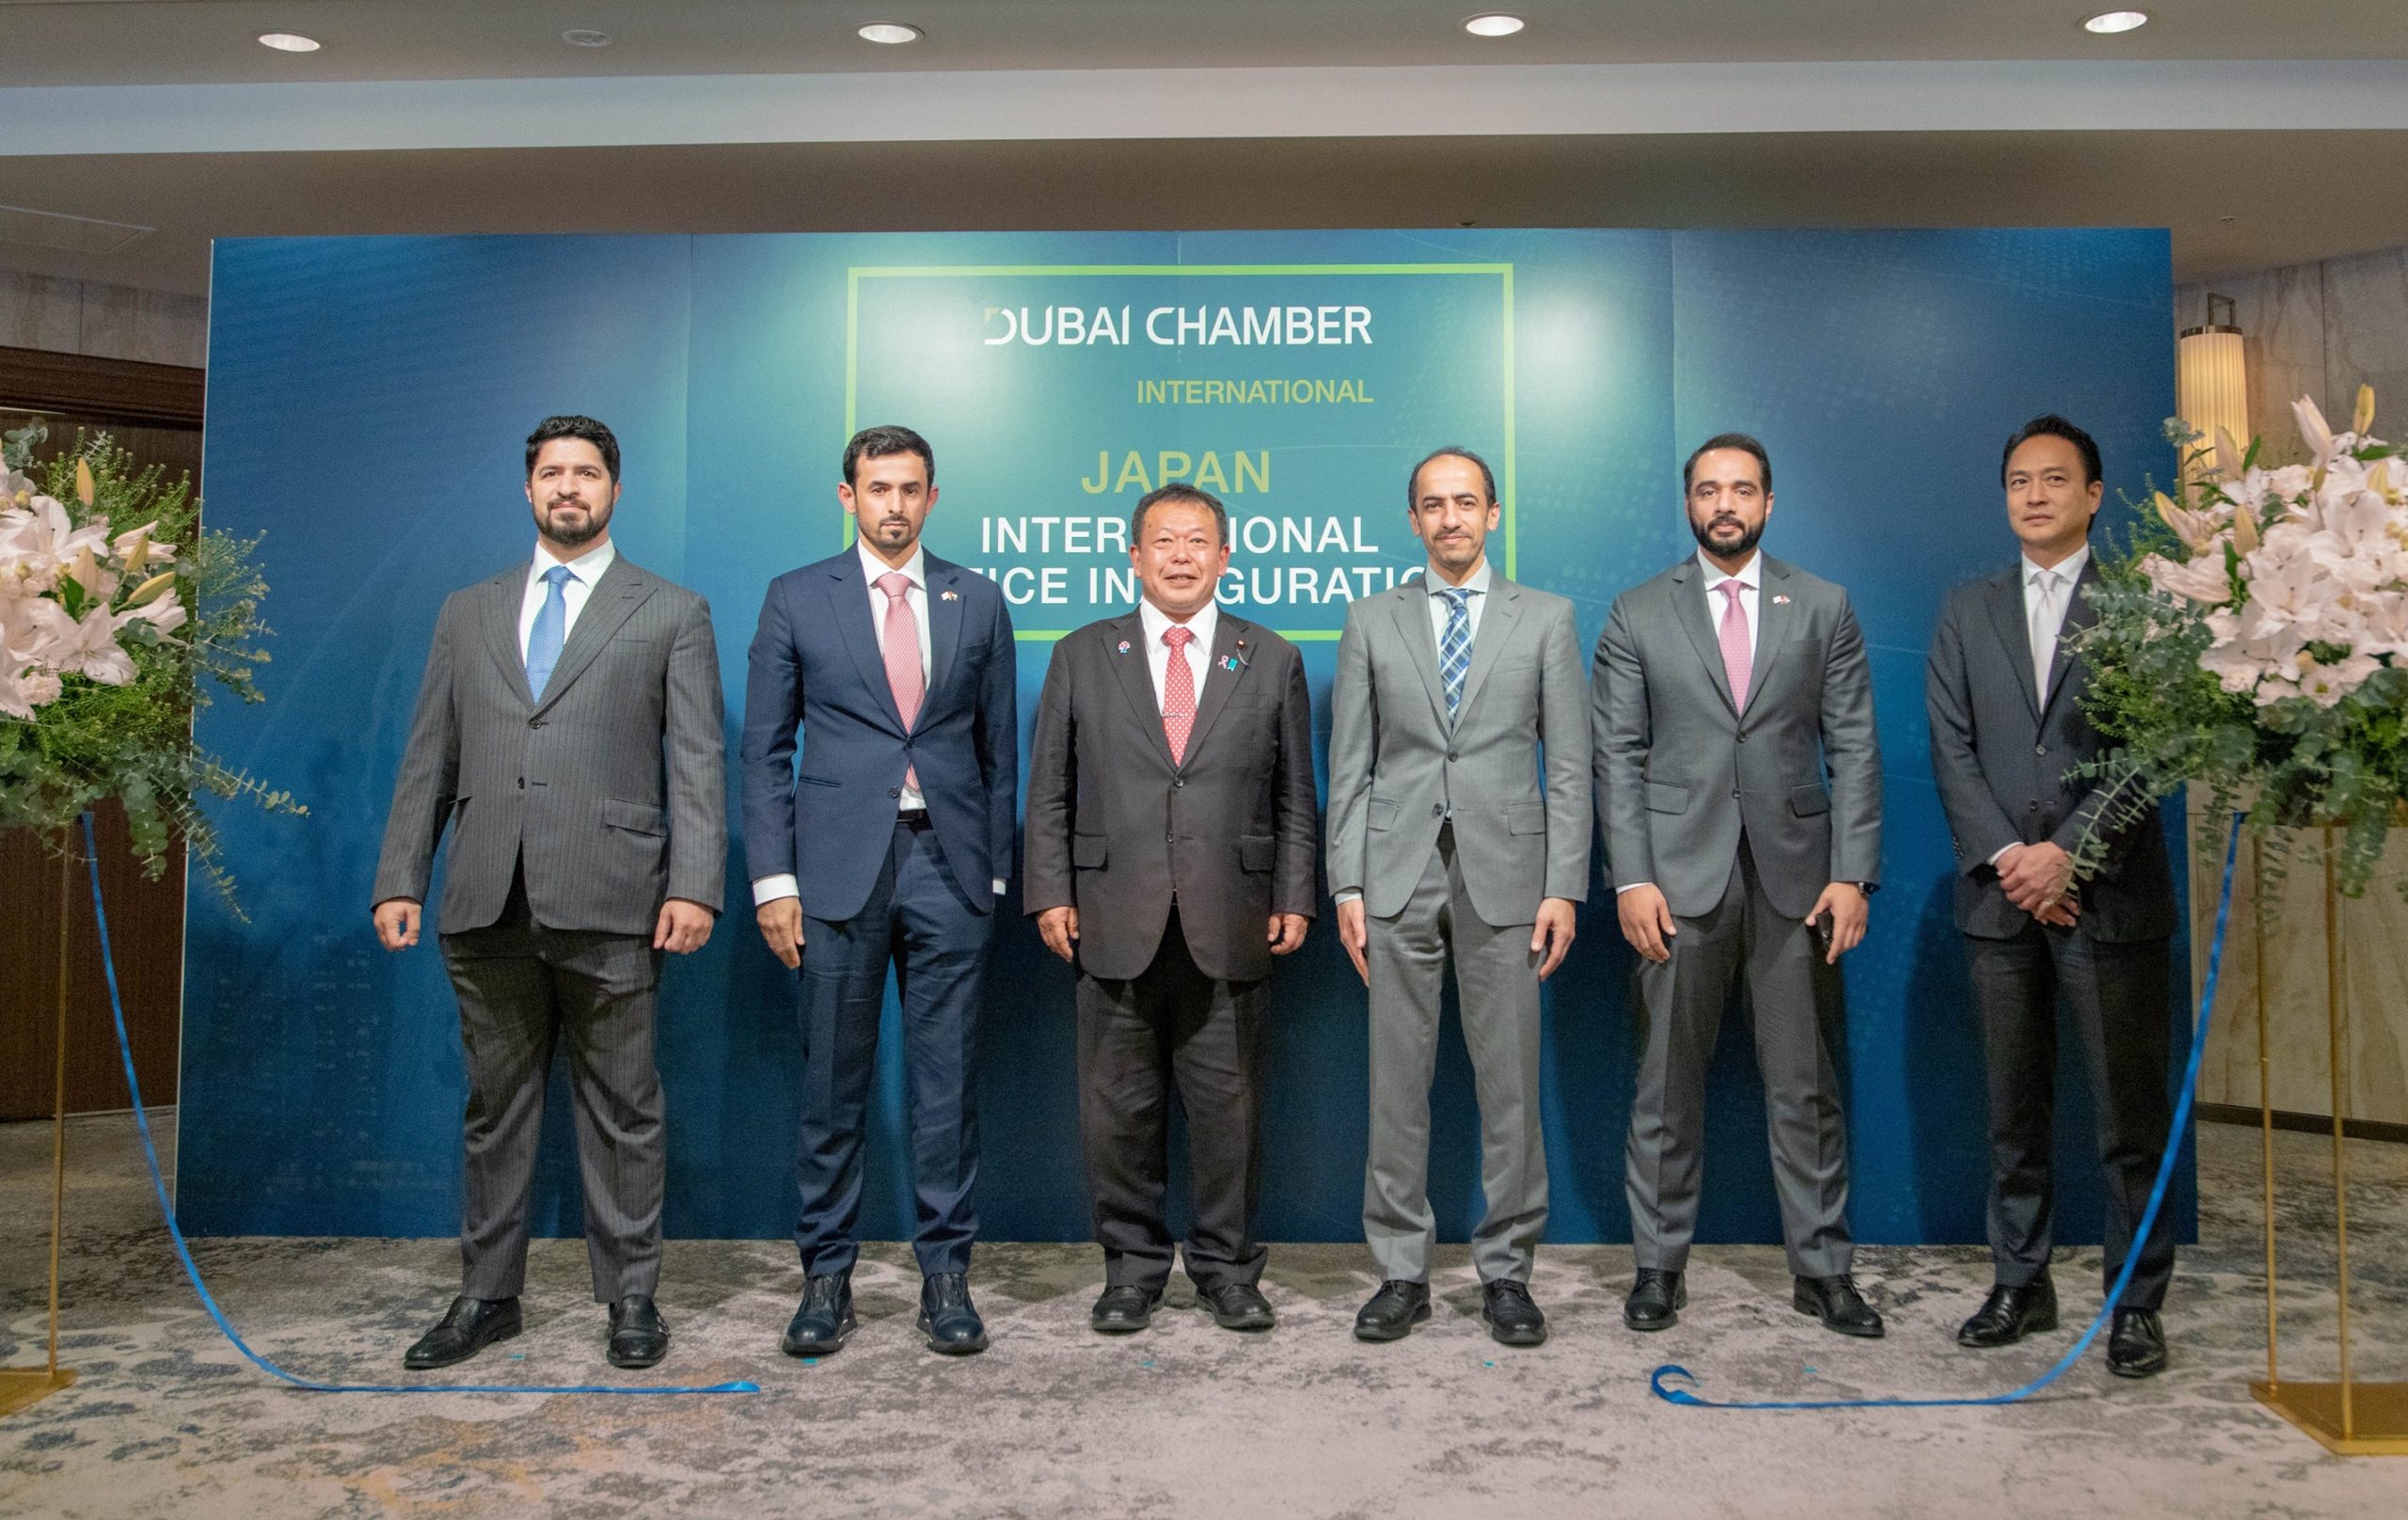 Dubai International Chamber further enhances its presence in Asia with inauguration of new international representative office in Japan